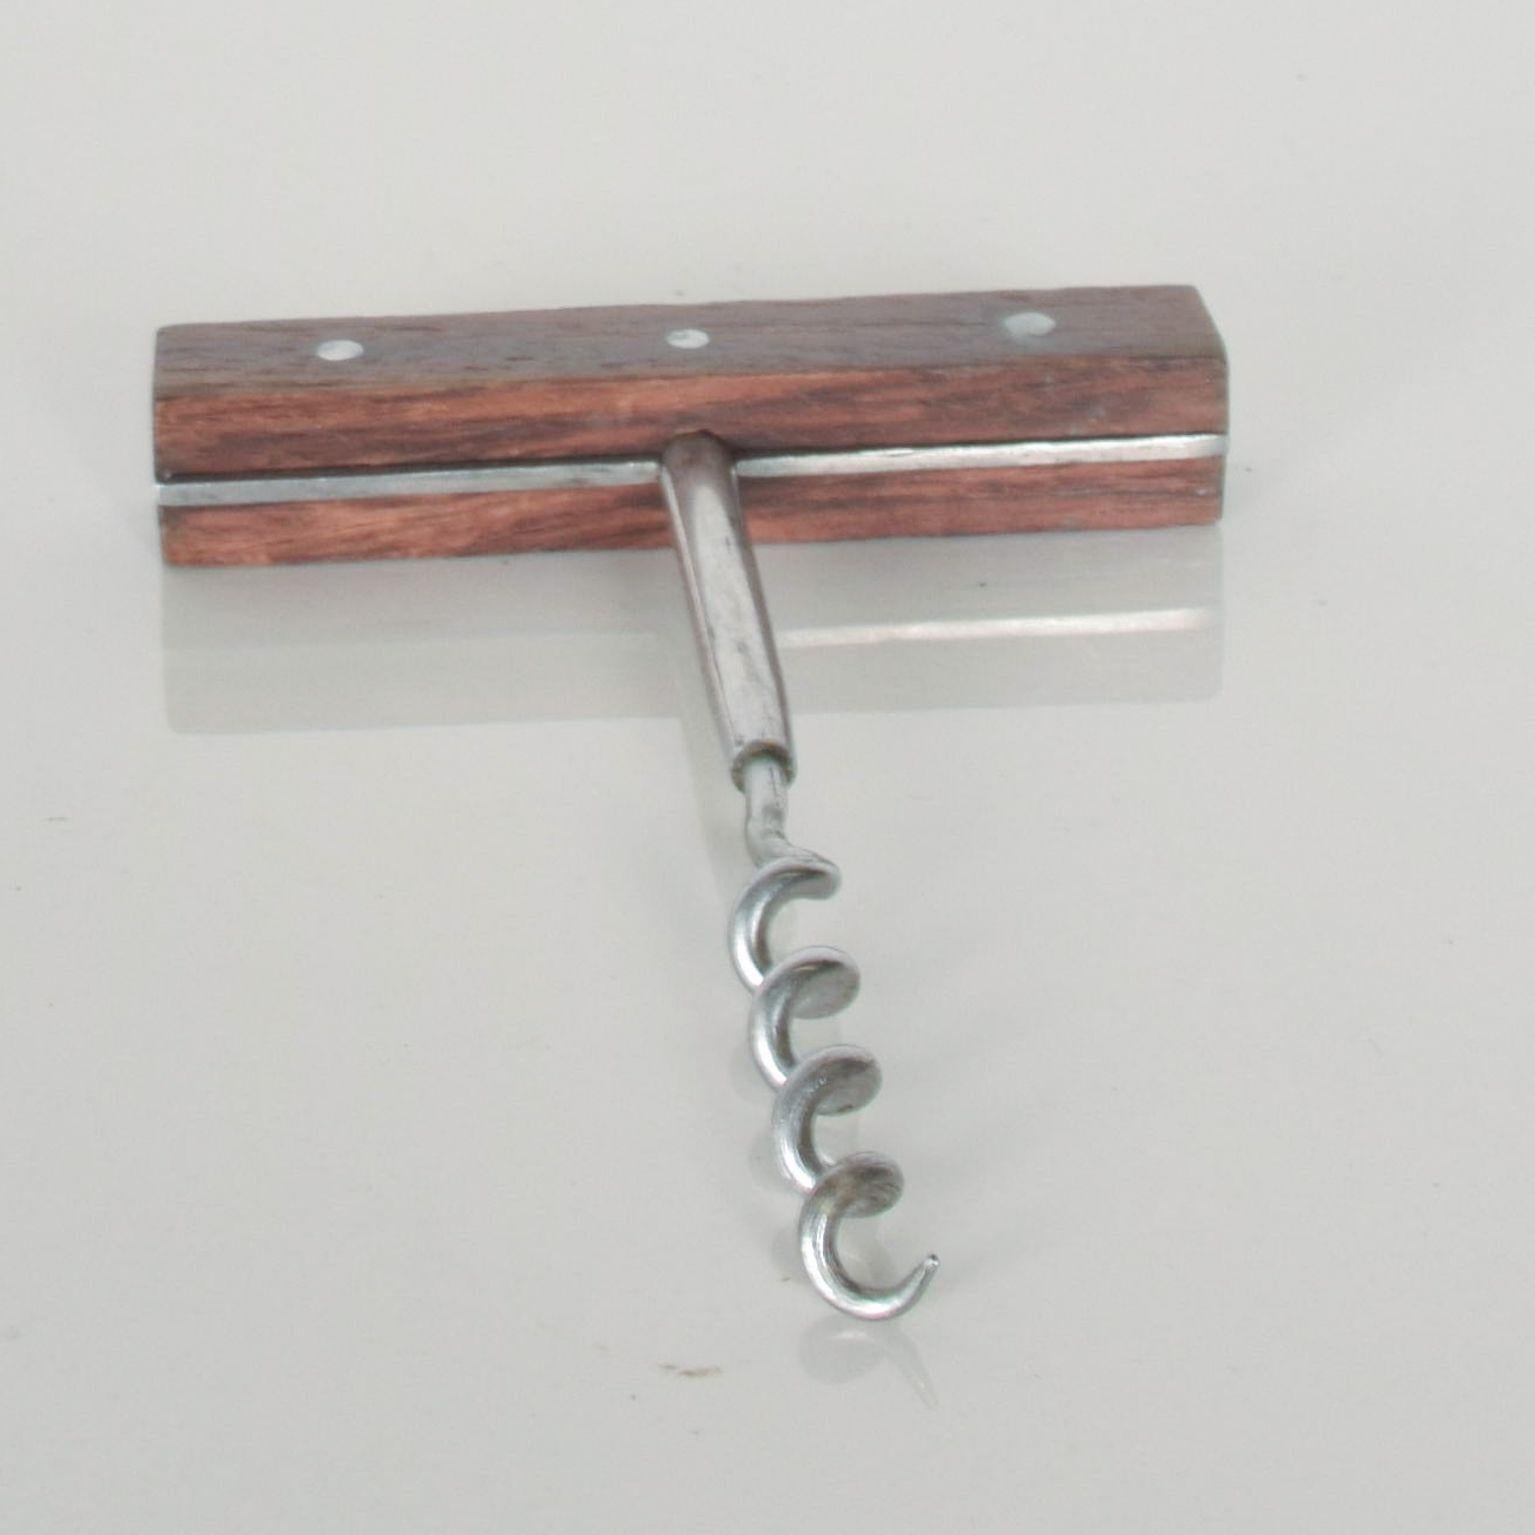 For your consideration: Vintage Mid-Century Modern wine bottle bar corkscrew opener.
Made in stainless steel with rosewood handles. Stamped 